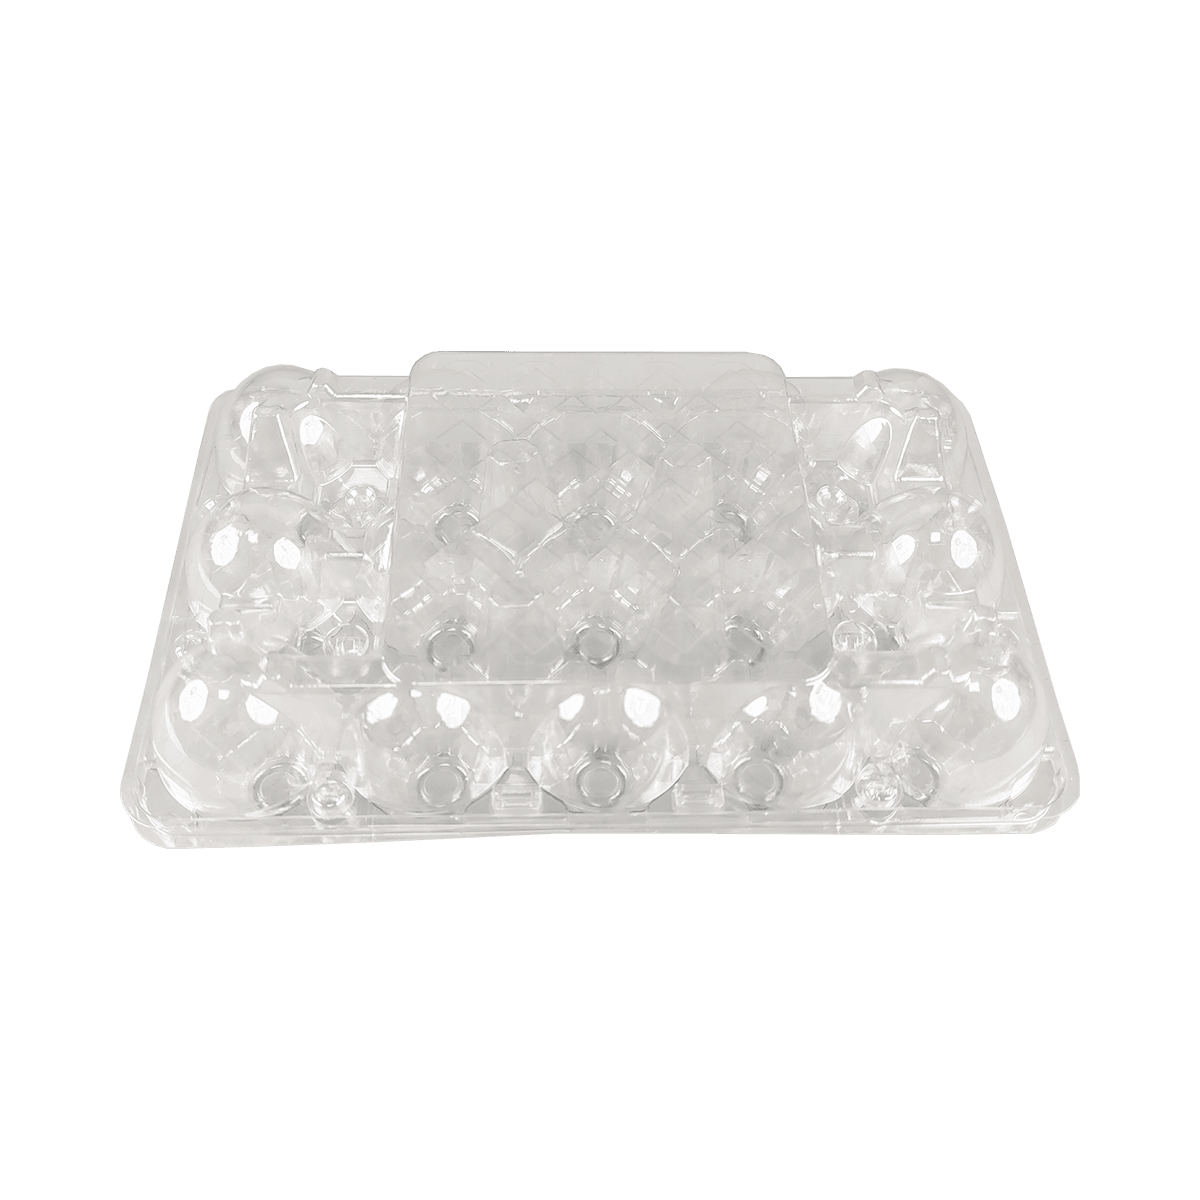 Environmentally friendly PET Transparent 15 egg cartons are suitable for chicken farms and market displays